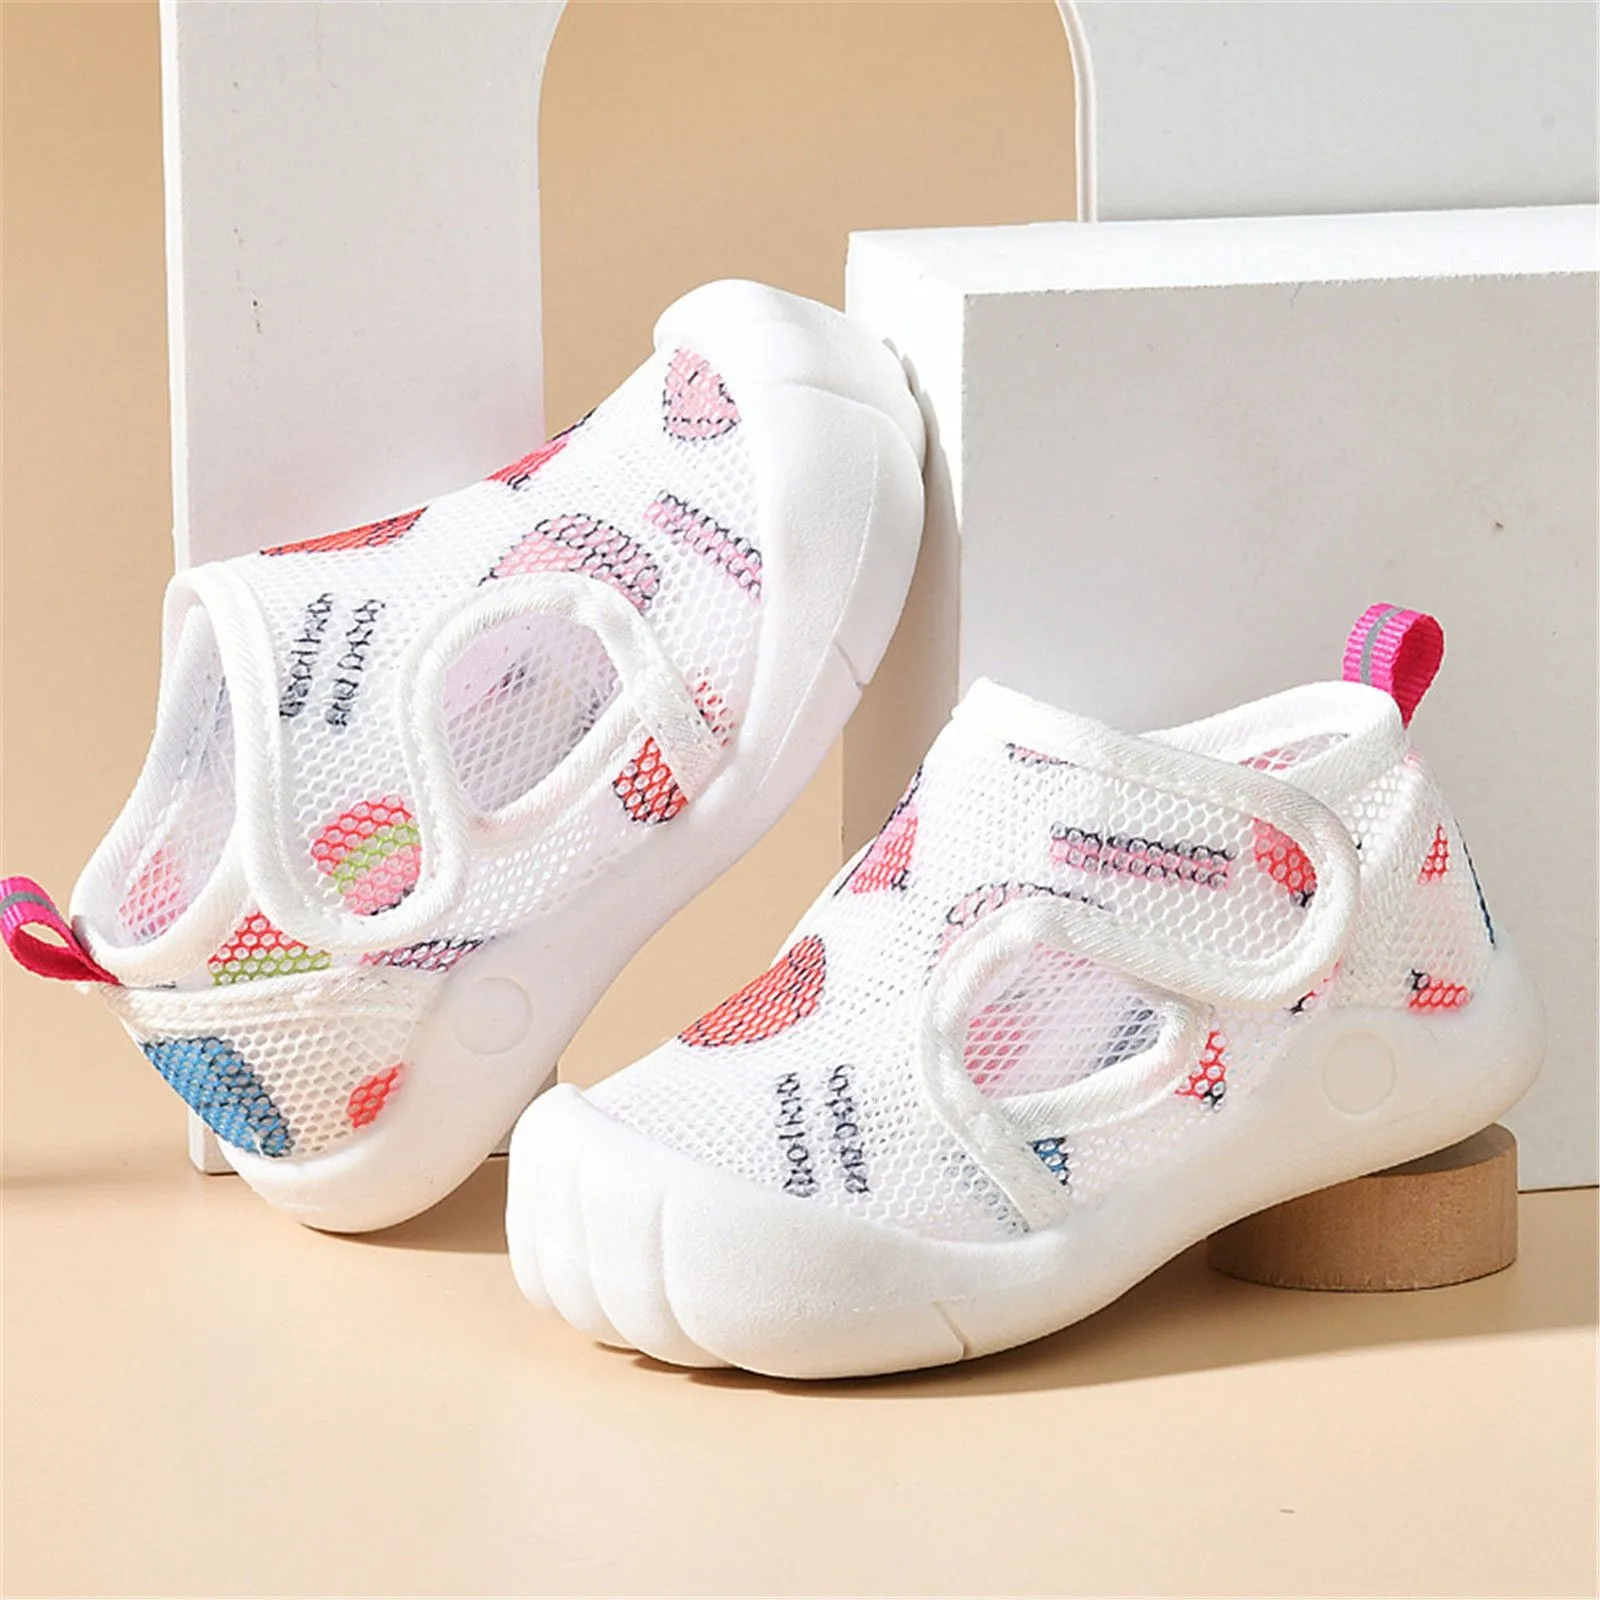 

Summer Breathable Air Mesh Kids Sandals 1-4T Baby Unisex Casual Shoes Anti-slip Soft Sole First Walkers Infant Lightweight Shoes